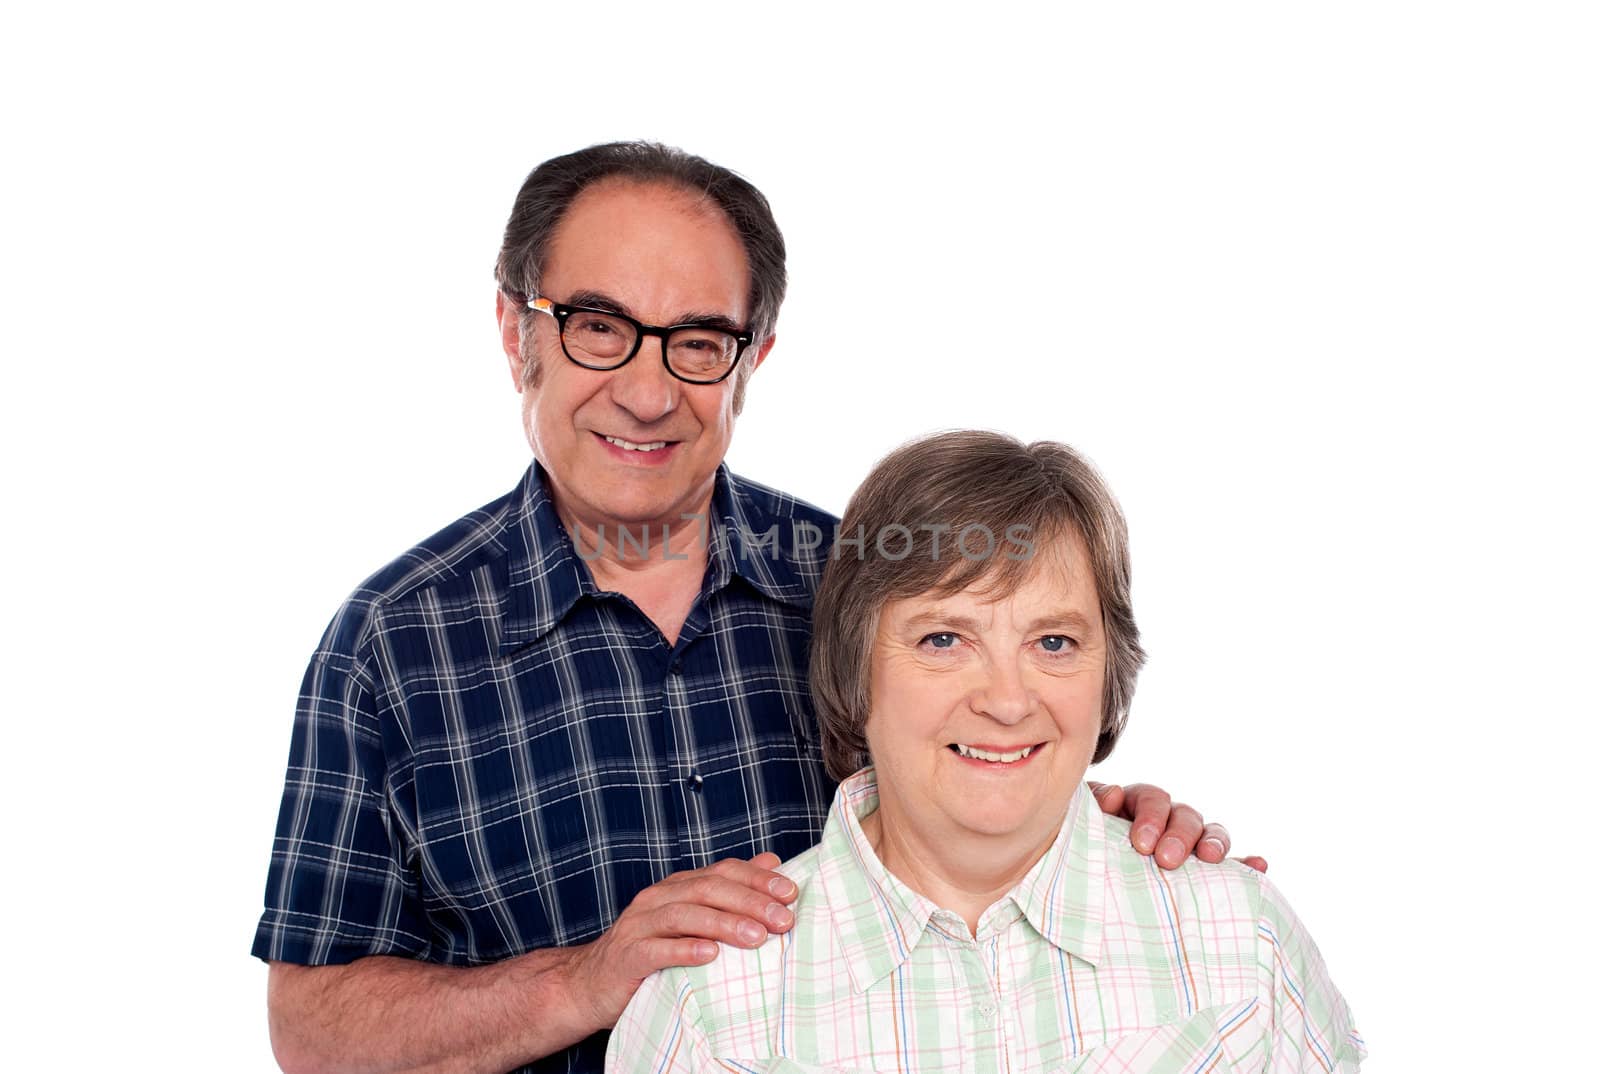 Portrait of smiling matured couple. Man resting his hands on wife's shoulders